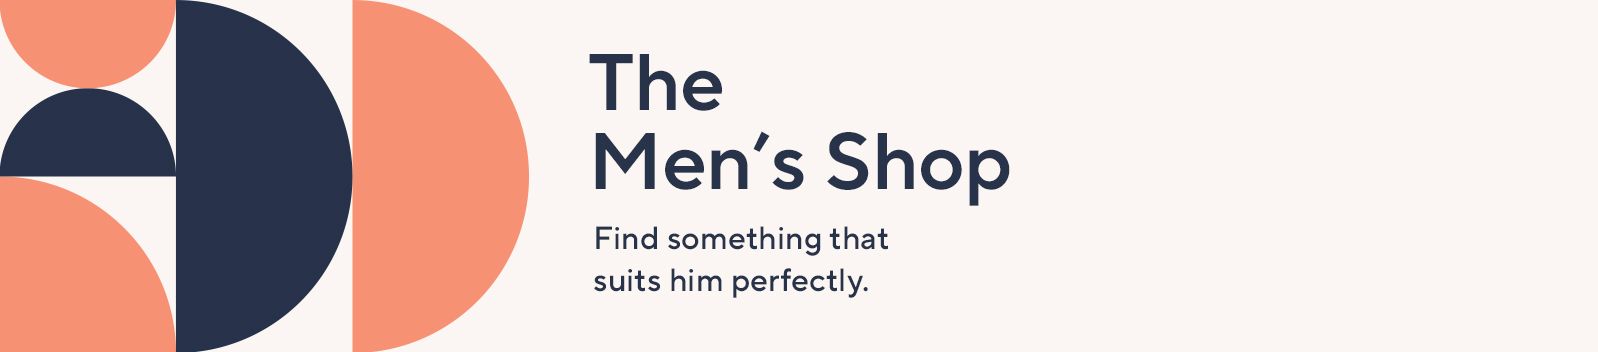 The Men's Shop: Find something that suits him perfectly. 